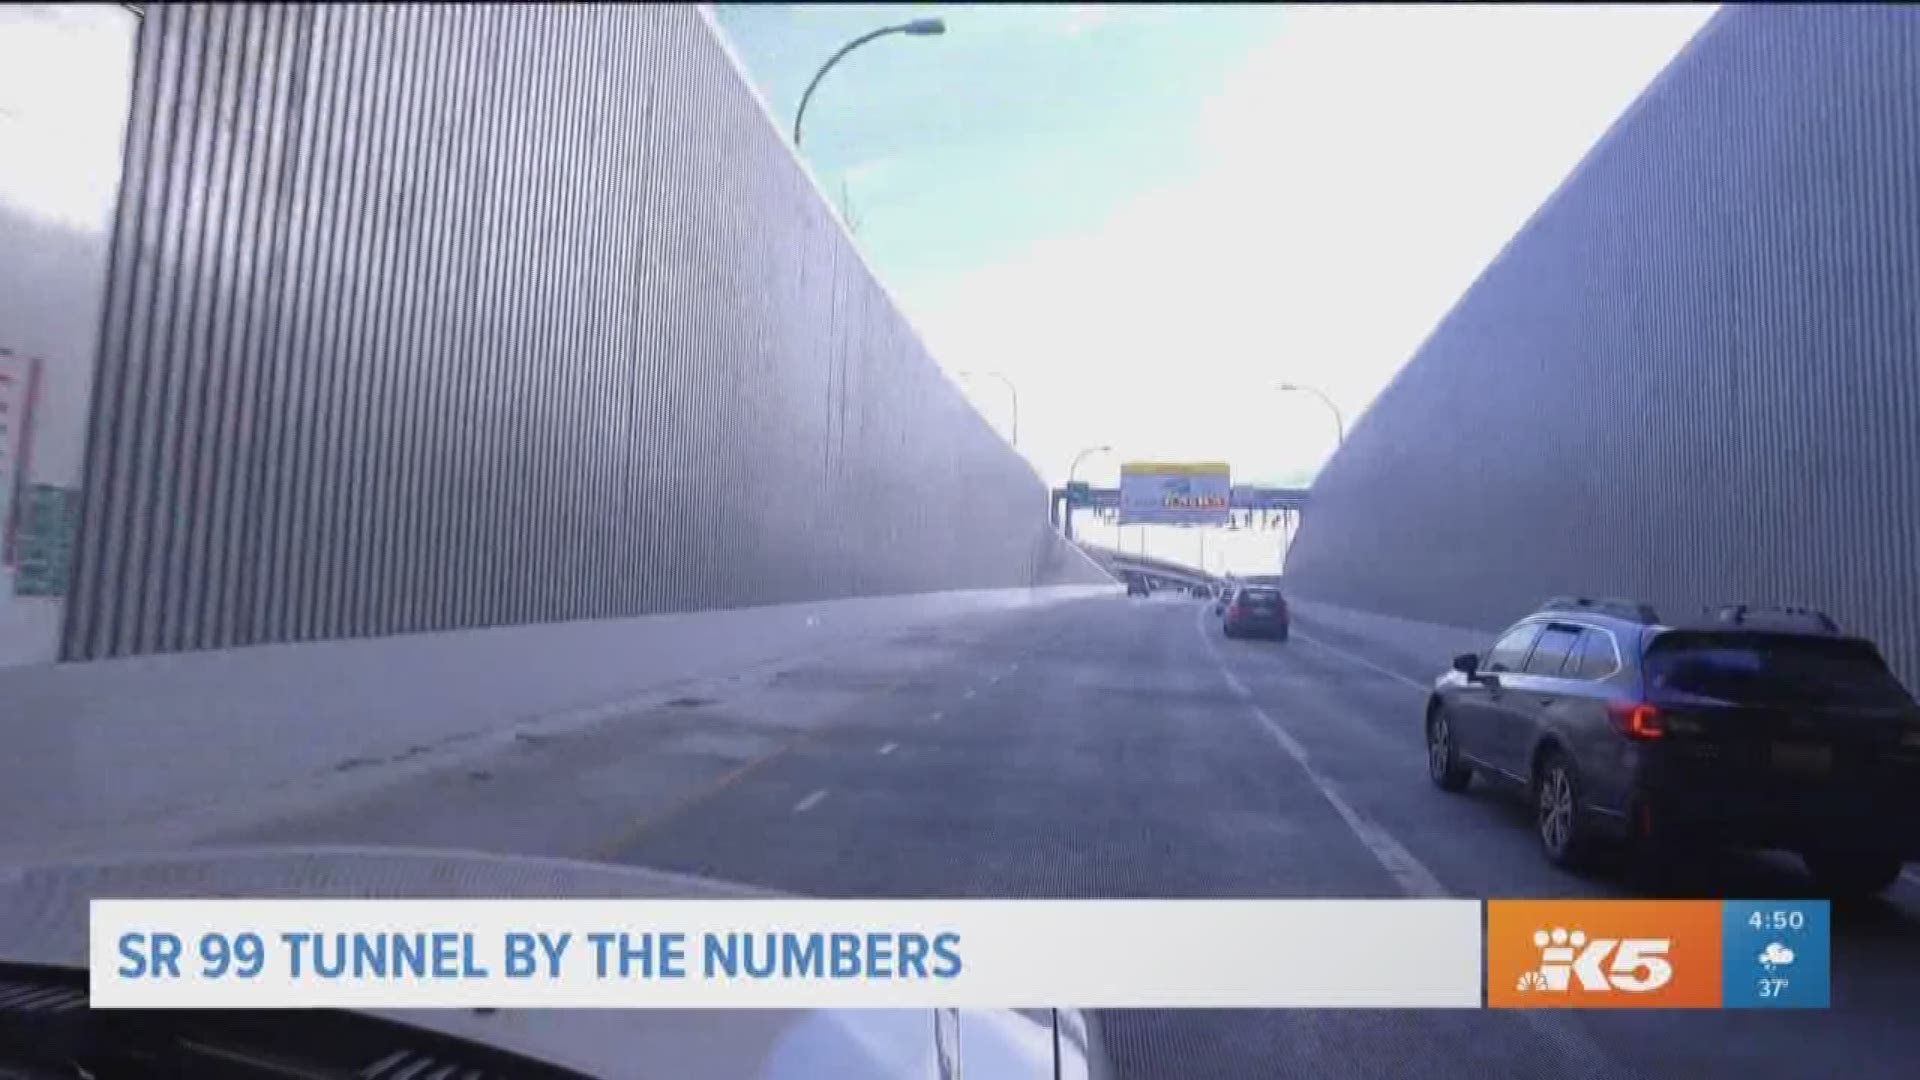 It has been one year since the SR 99 tunnel opened, and new numbers show over one million trips travel through the underground highway each month.